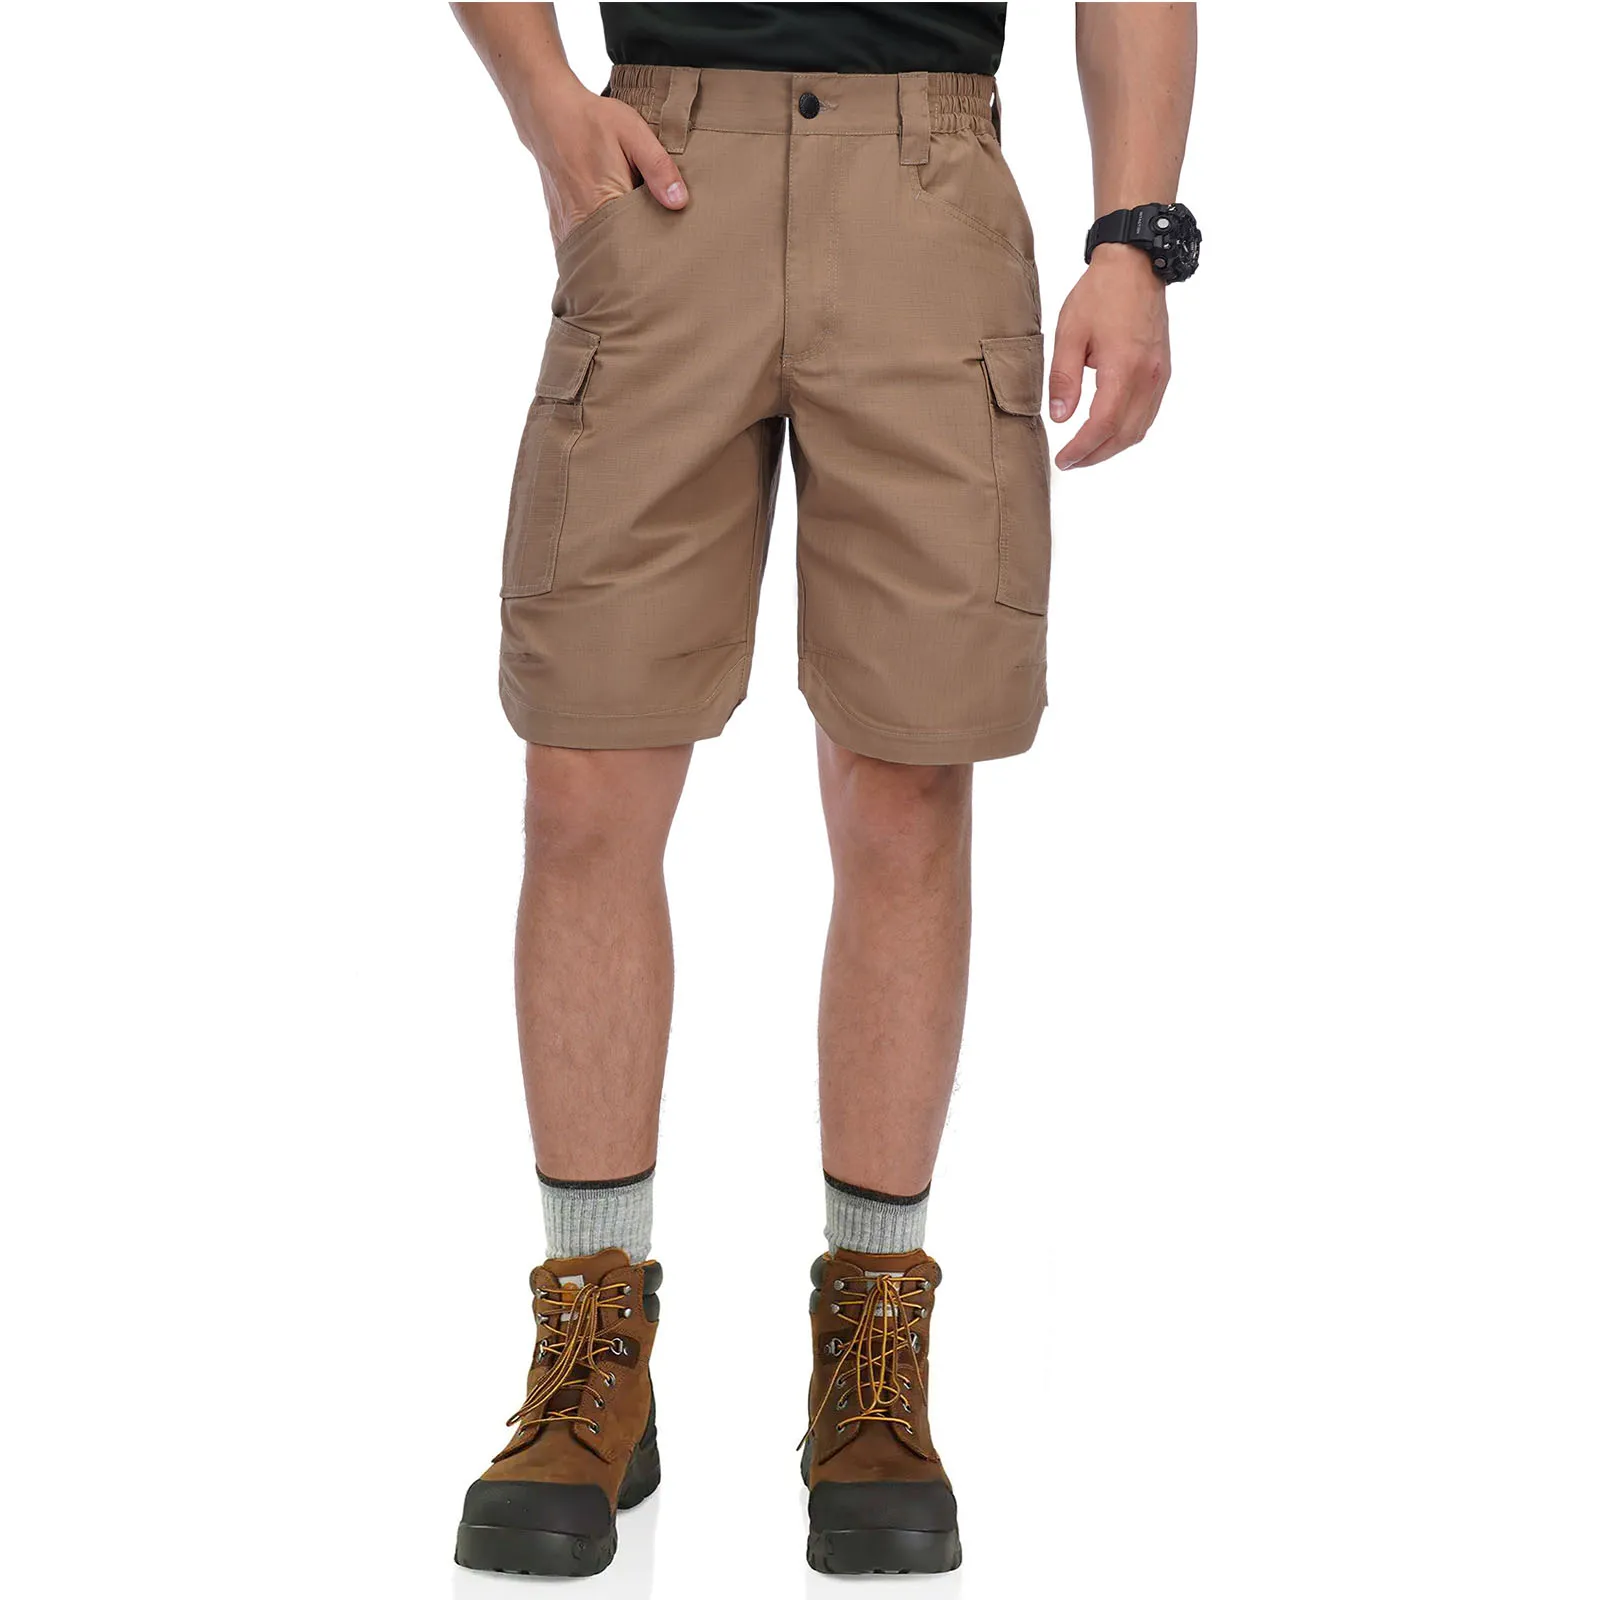 Men's Tactical Shorts HARD LAND Military Camouflage Ripstop Khaki Cargo Work Short with Pockets Jogger Urban Casual Summer